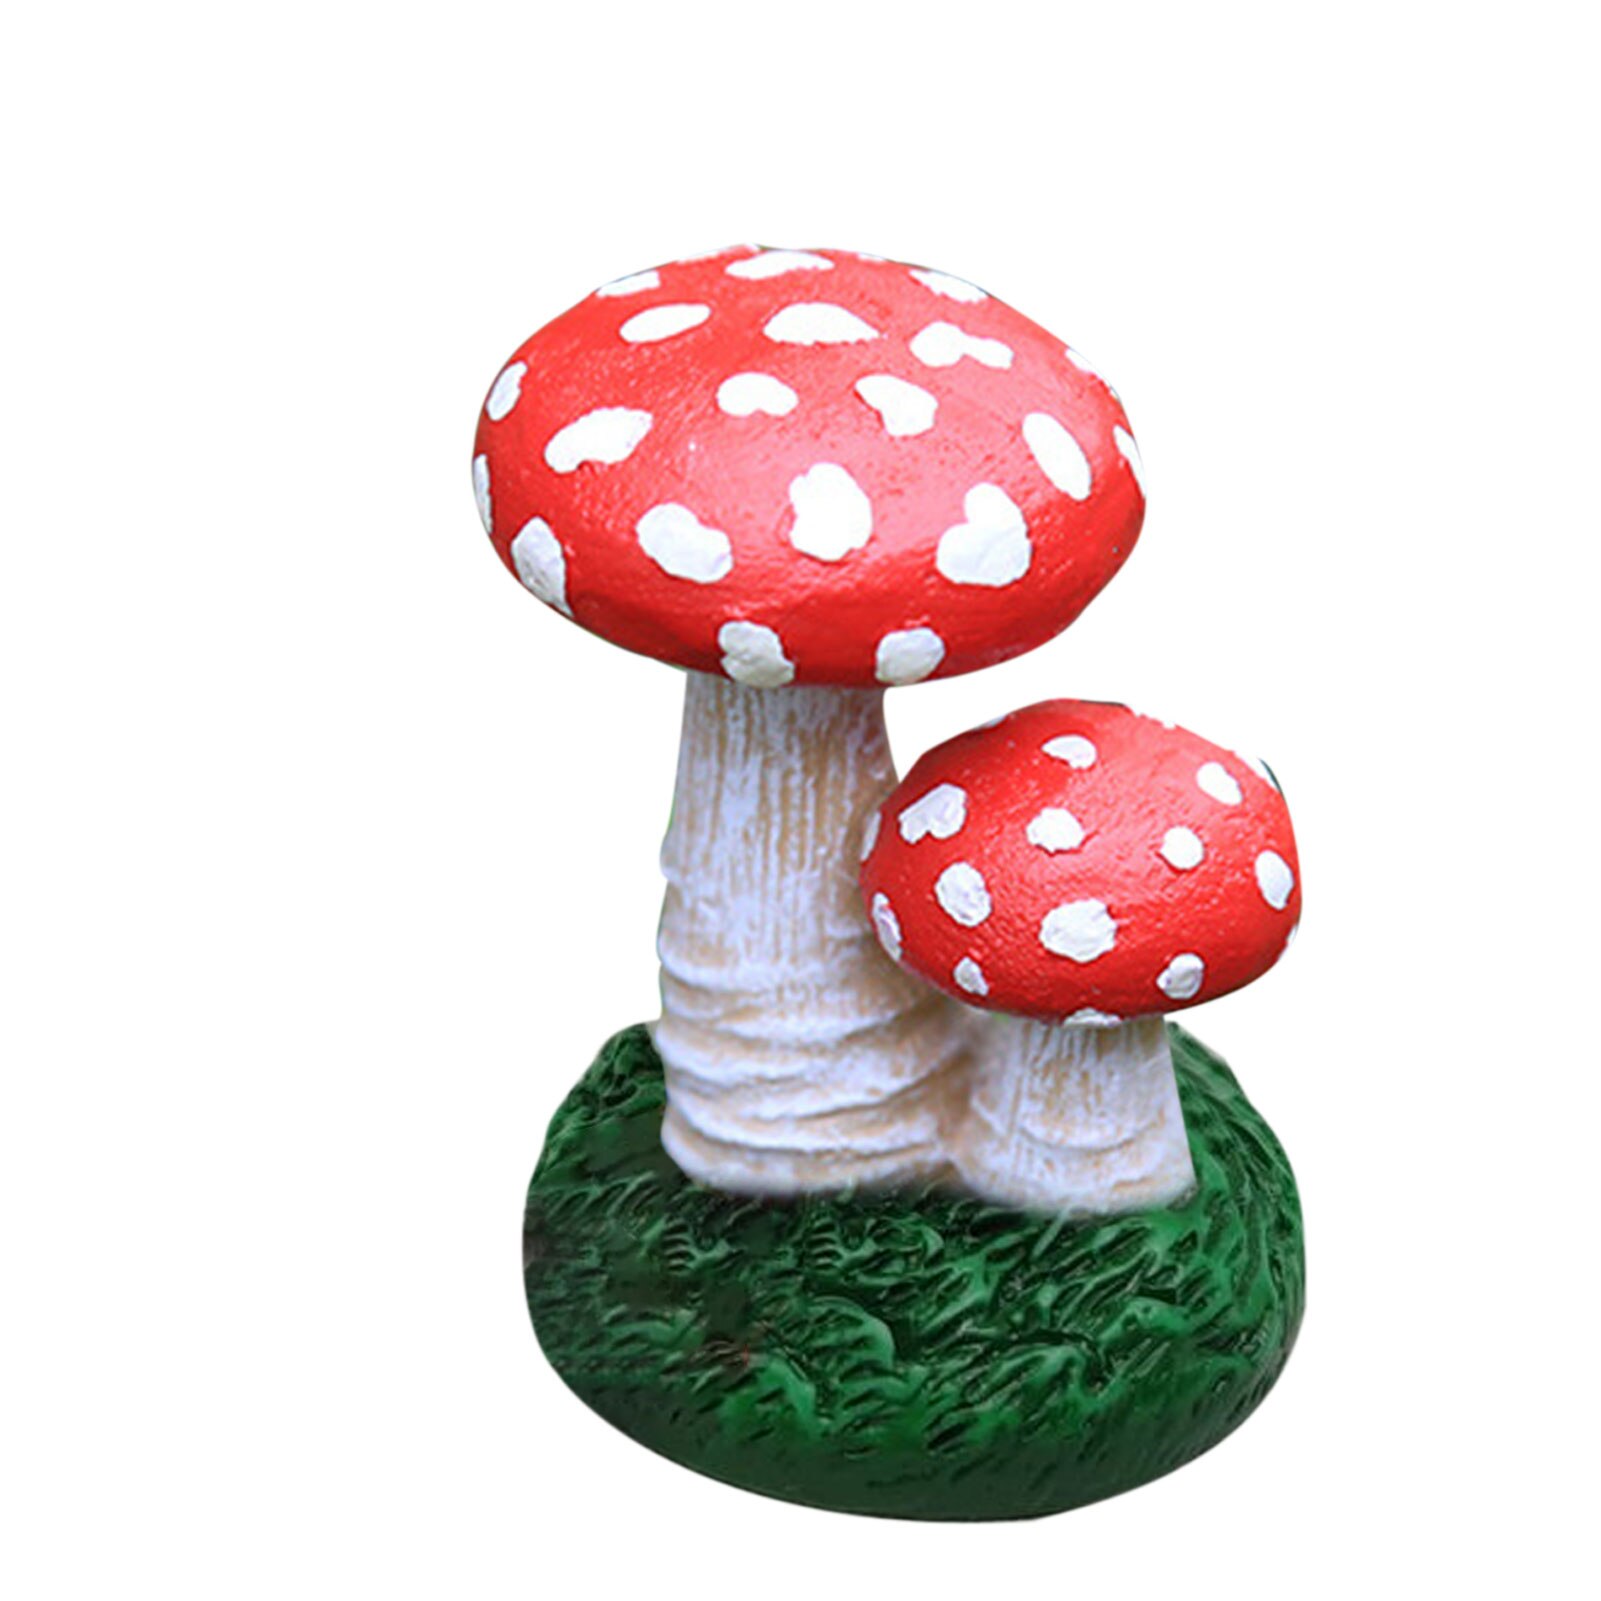 Simulation Resin Mushroom Garden Decoration Mushroom Statue perfect for home lawn or garden exquisite and compact: Black